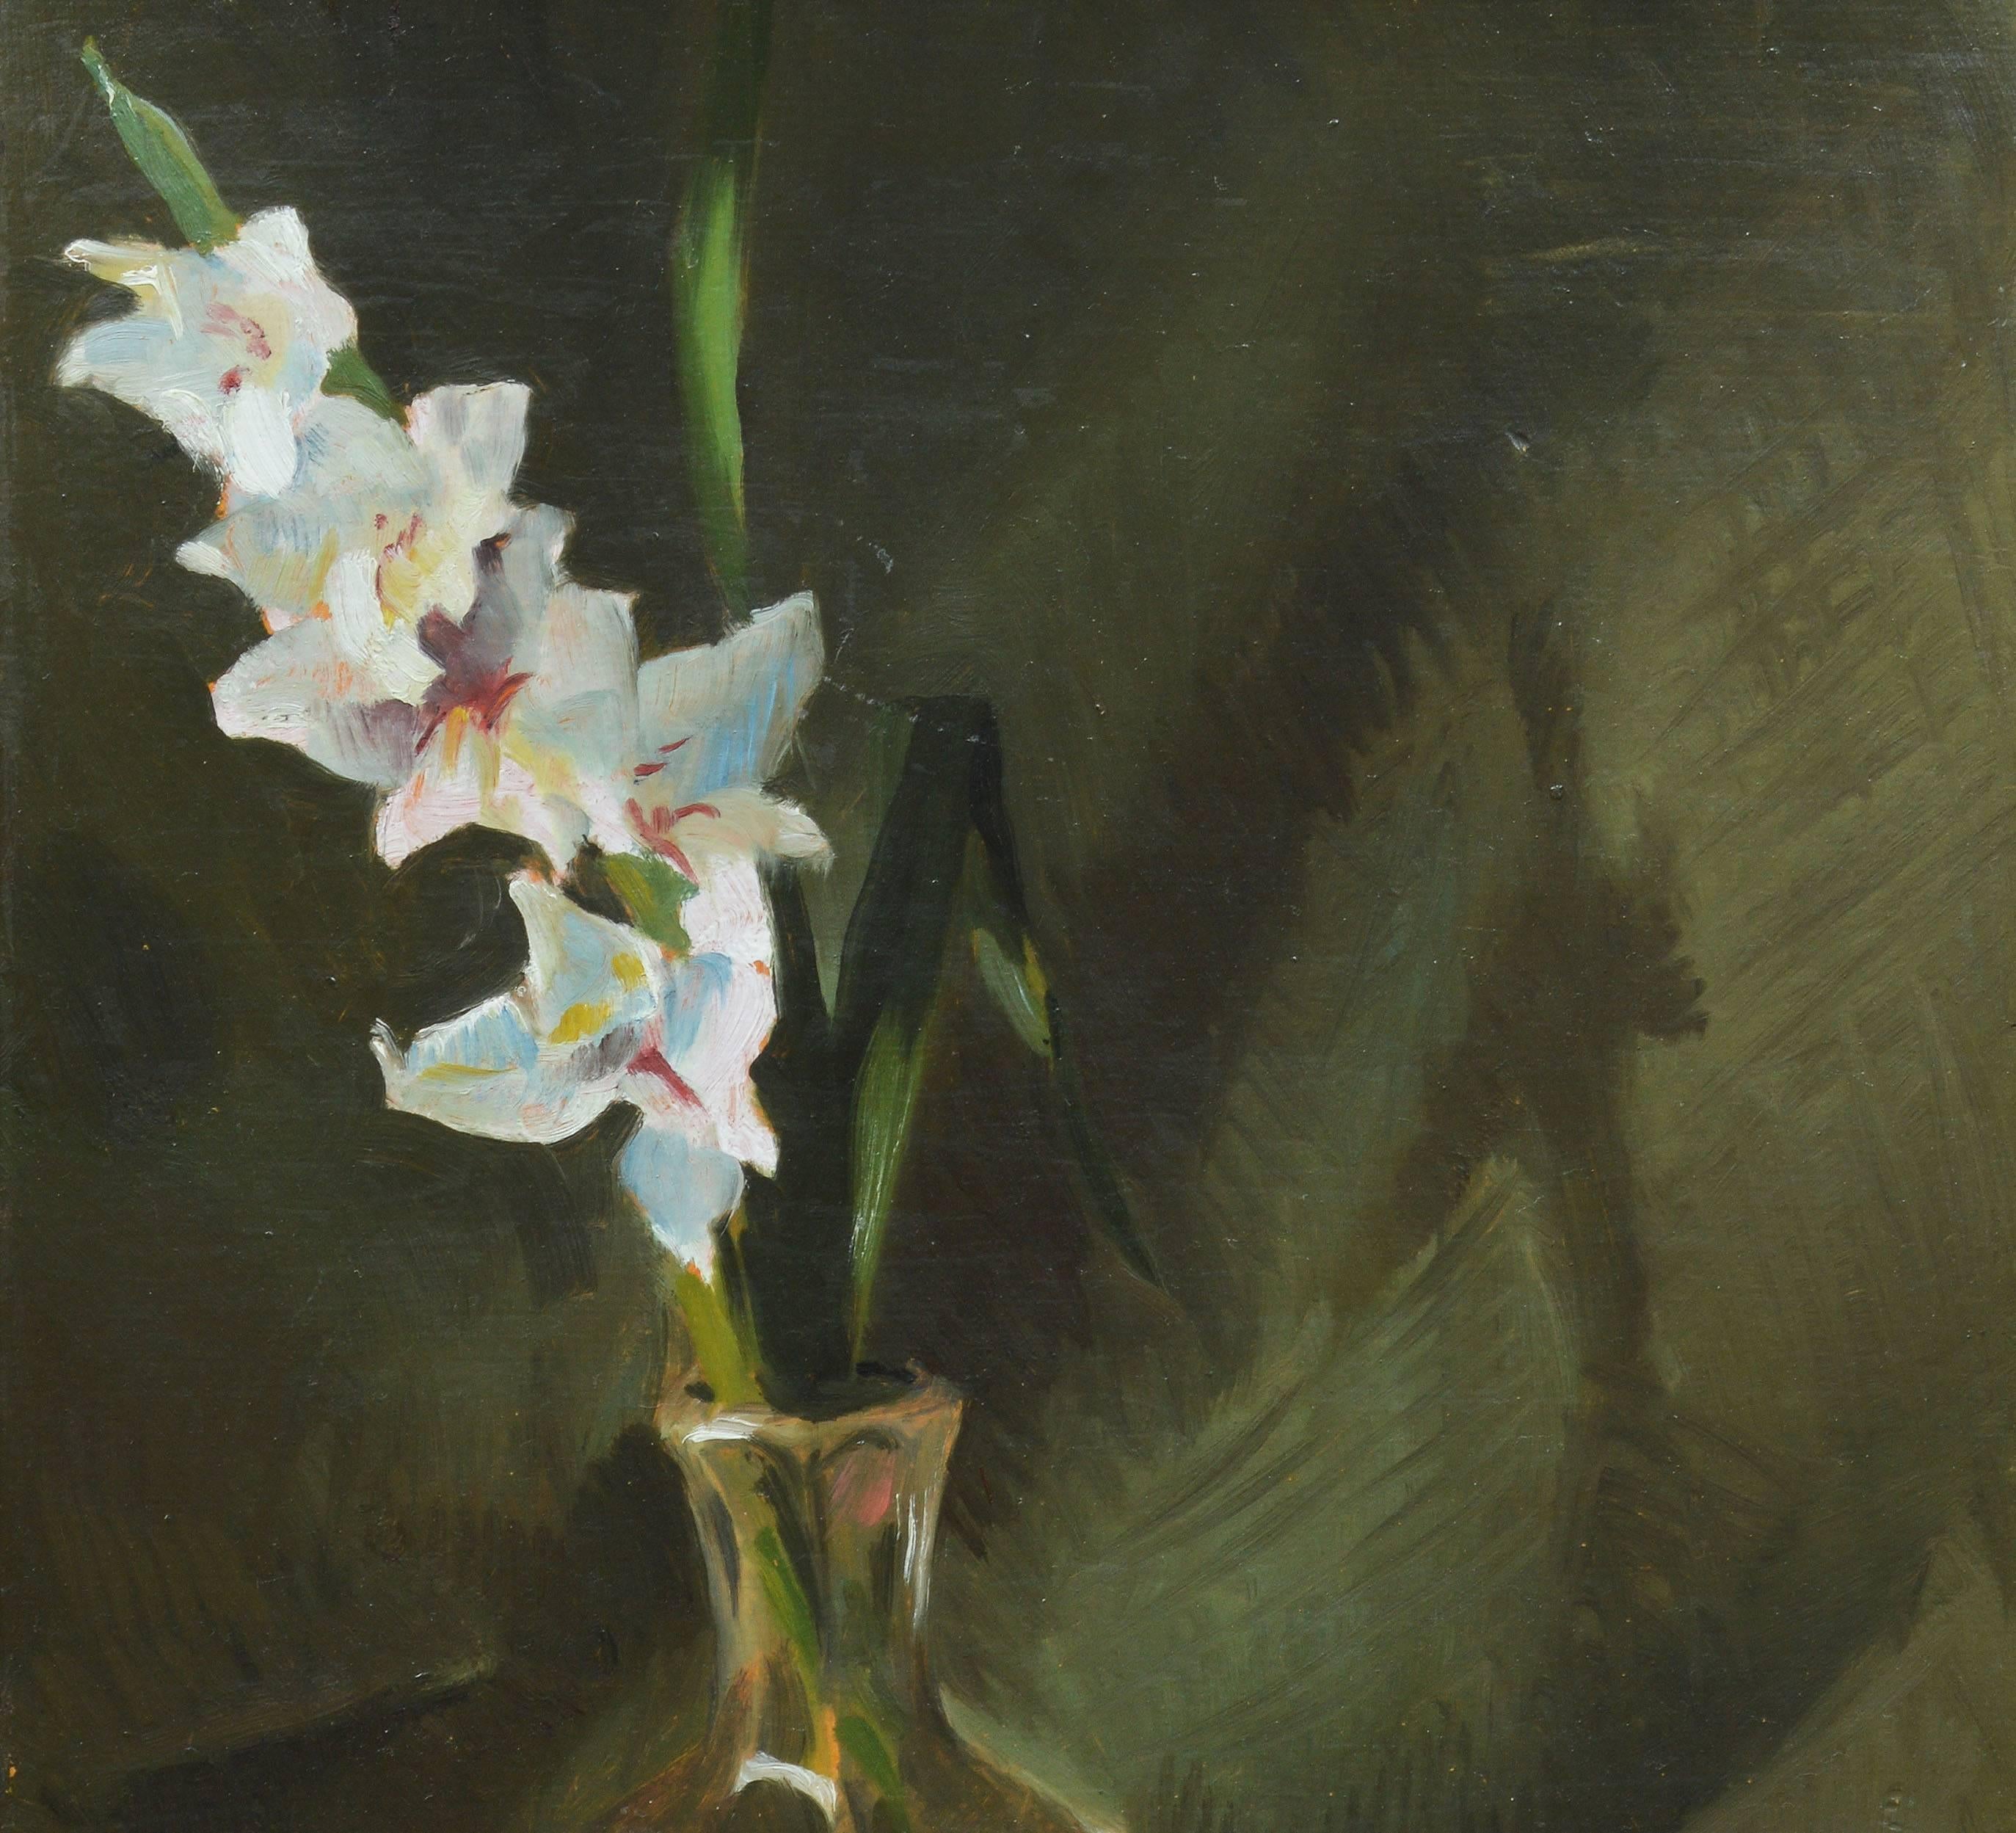 Modernist flower still life. Oil on board, circa 1920. Unsigned. Displayed in a giltwood frame.  Image size, 16